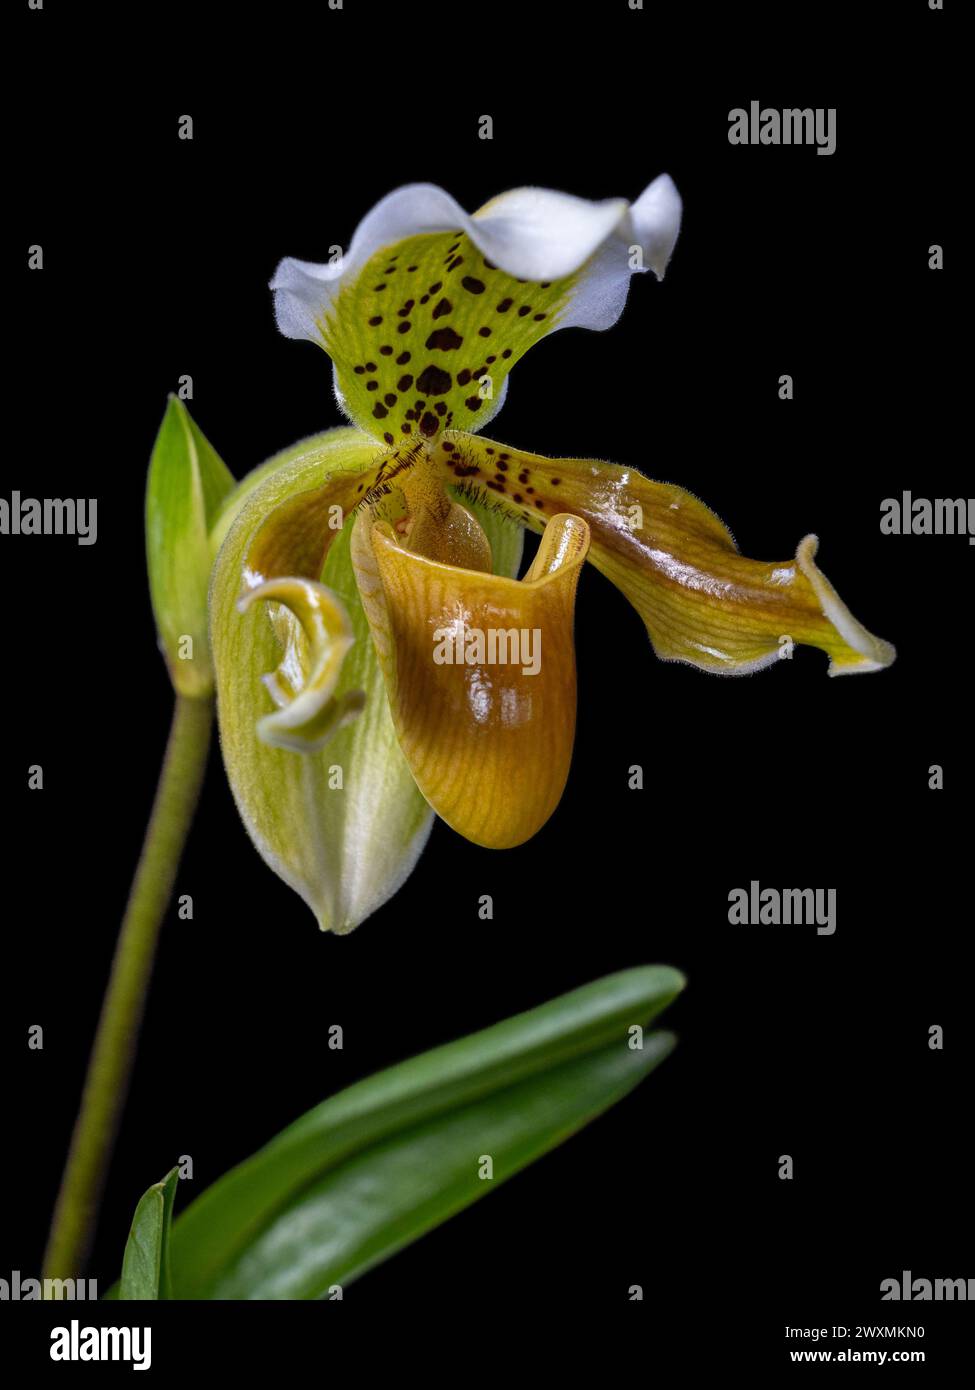 Closeup vertical view of fresh yellow brown and green flower of lady slipper orchid species paphiopedilum exul isolated on black background Stock Photo